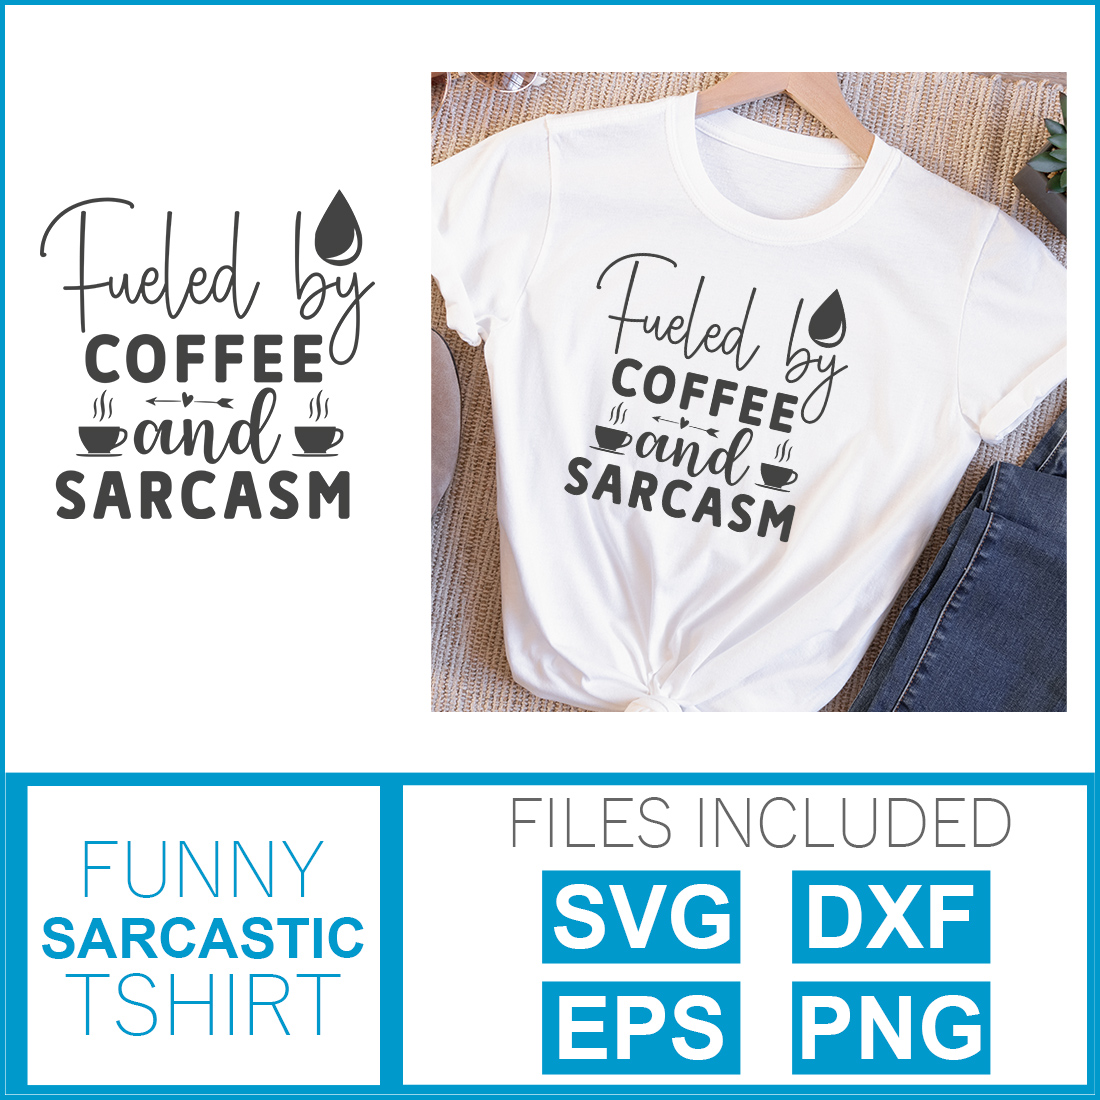 Image of a white t-shirt with an irresistible slogan "fueled by coffee and sarcasm".